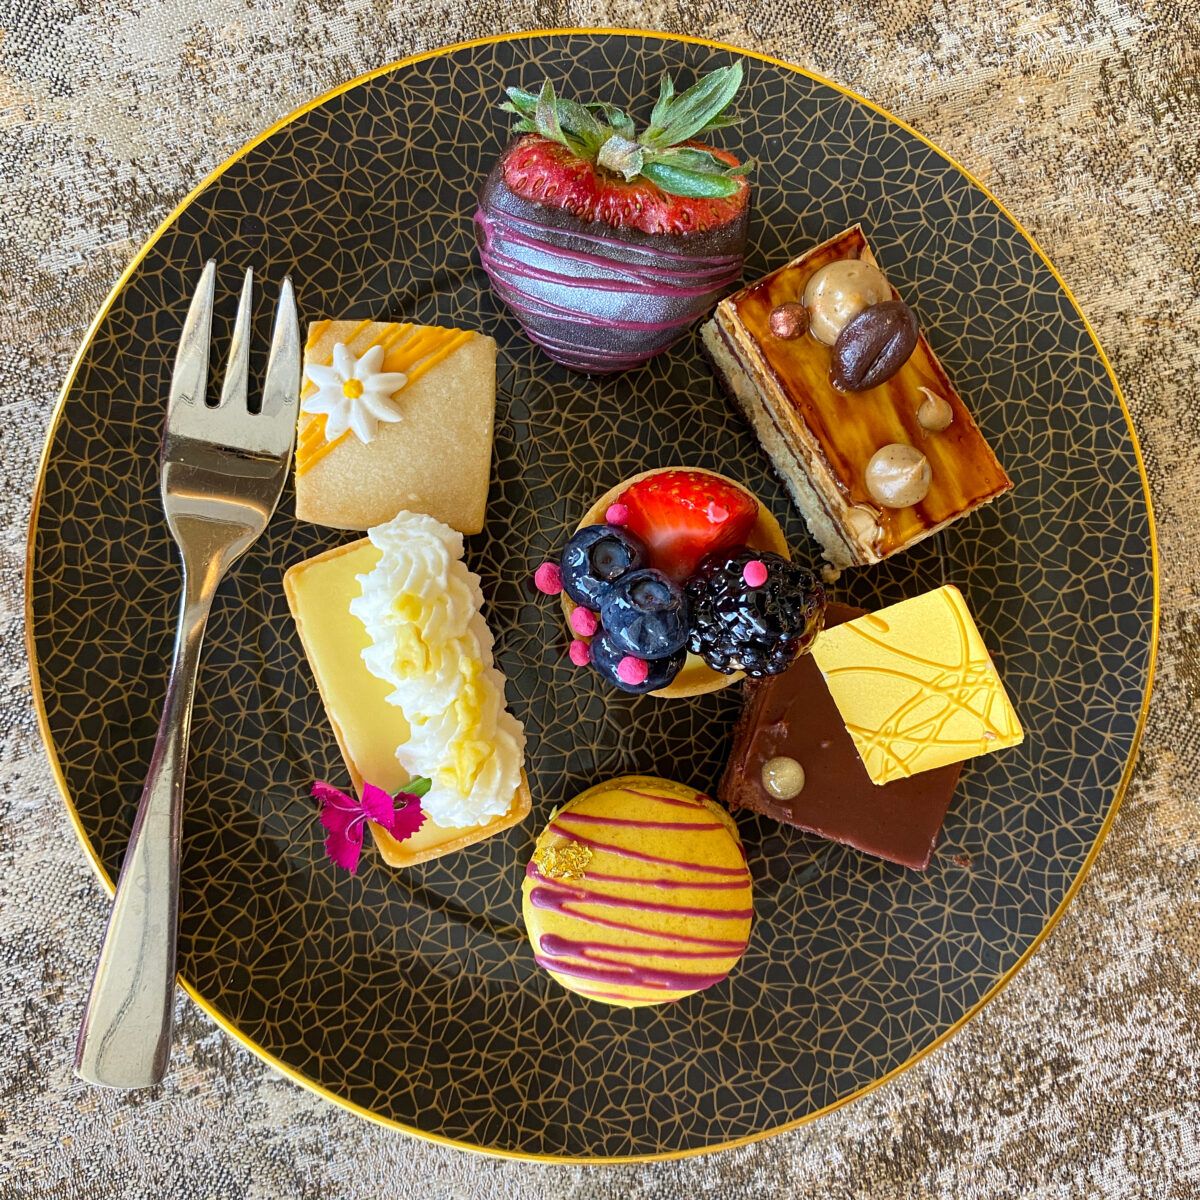 Afternoon tea sweets at the Phoenician Resort in Scottsdale